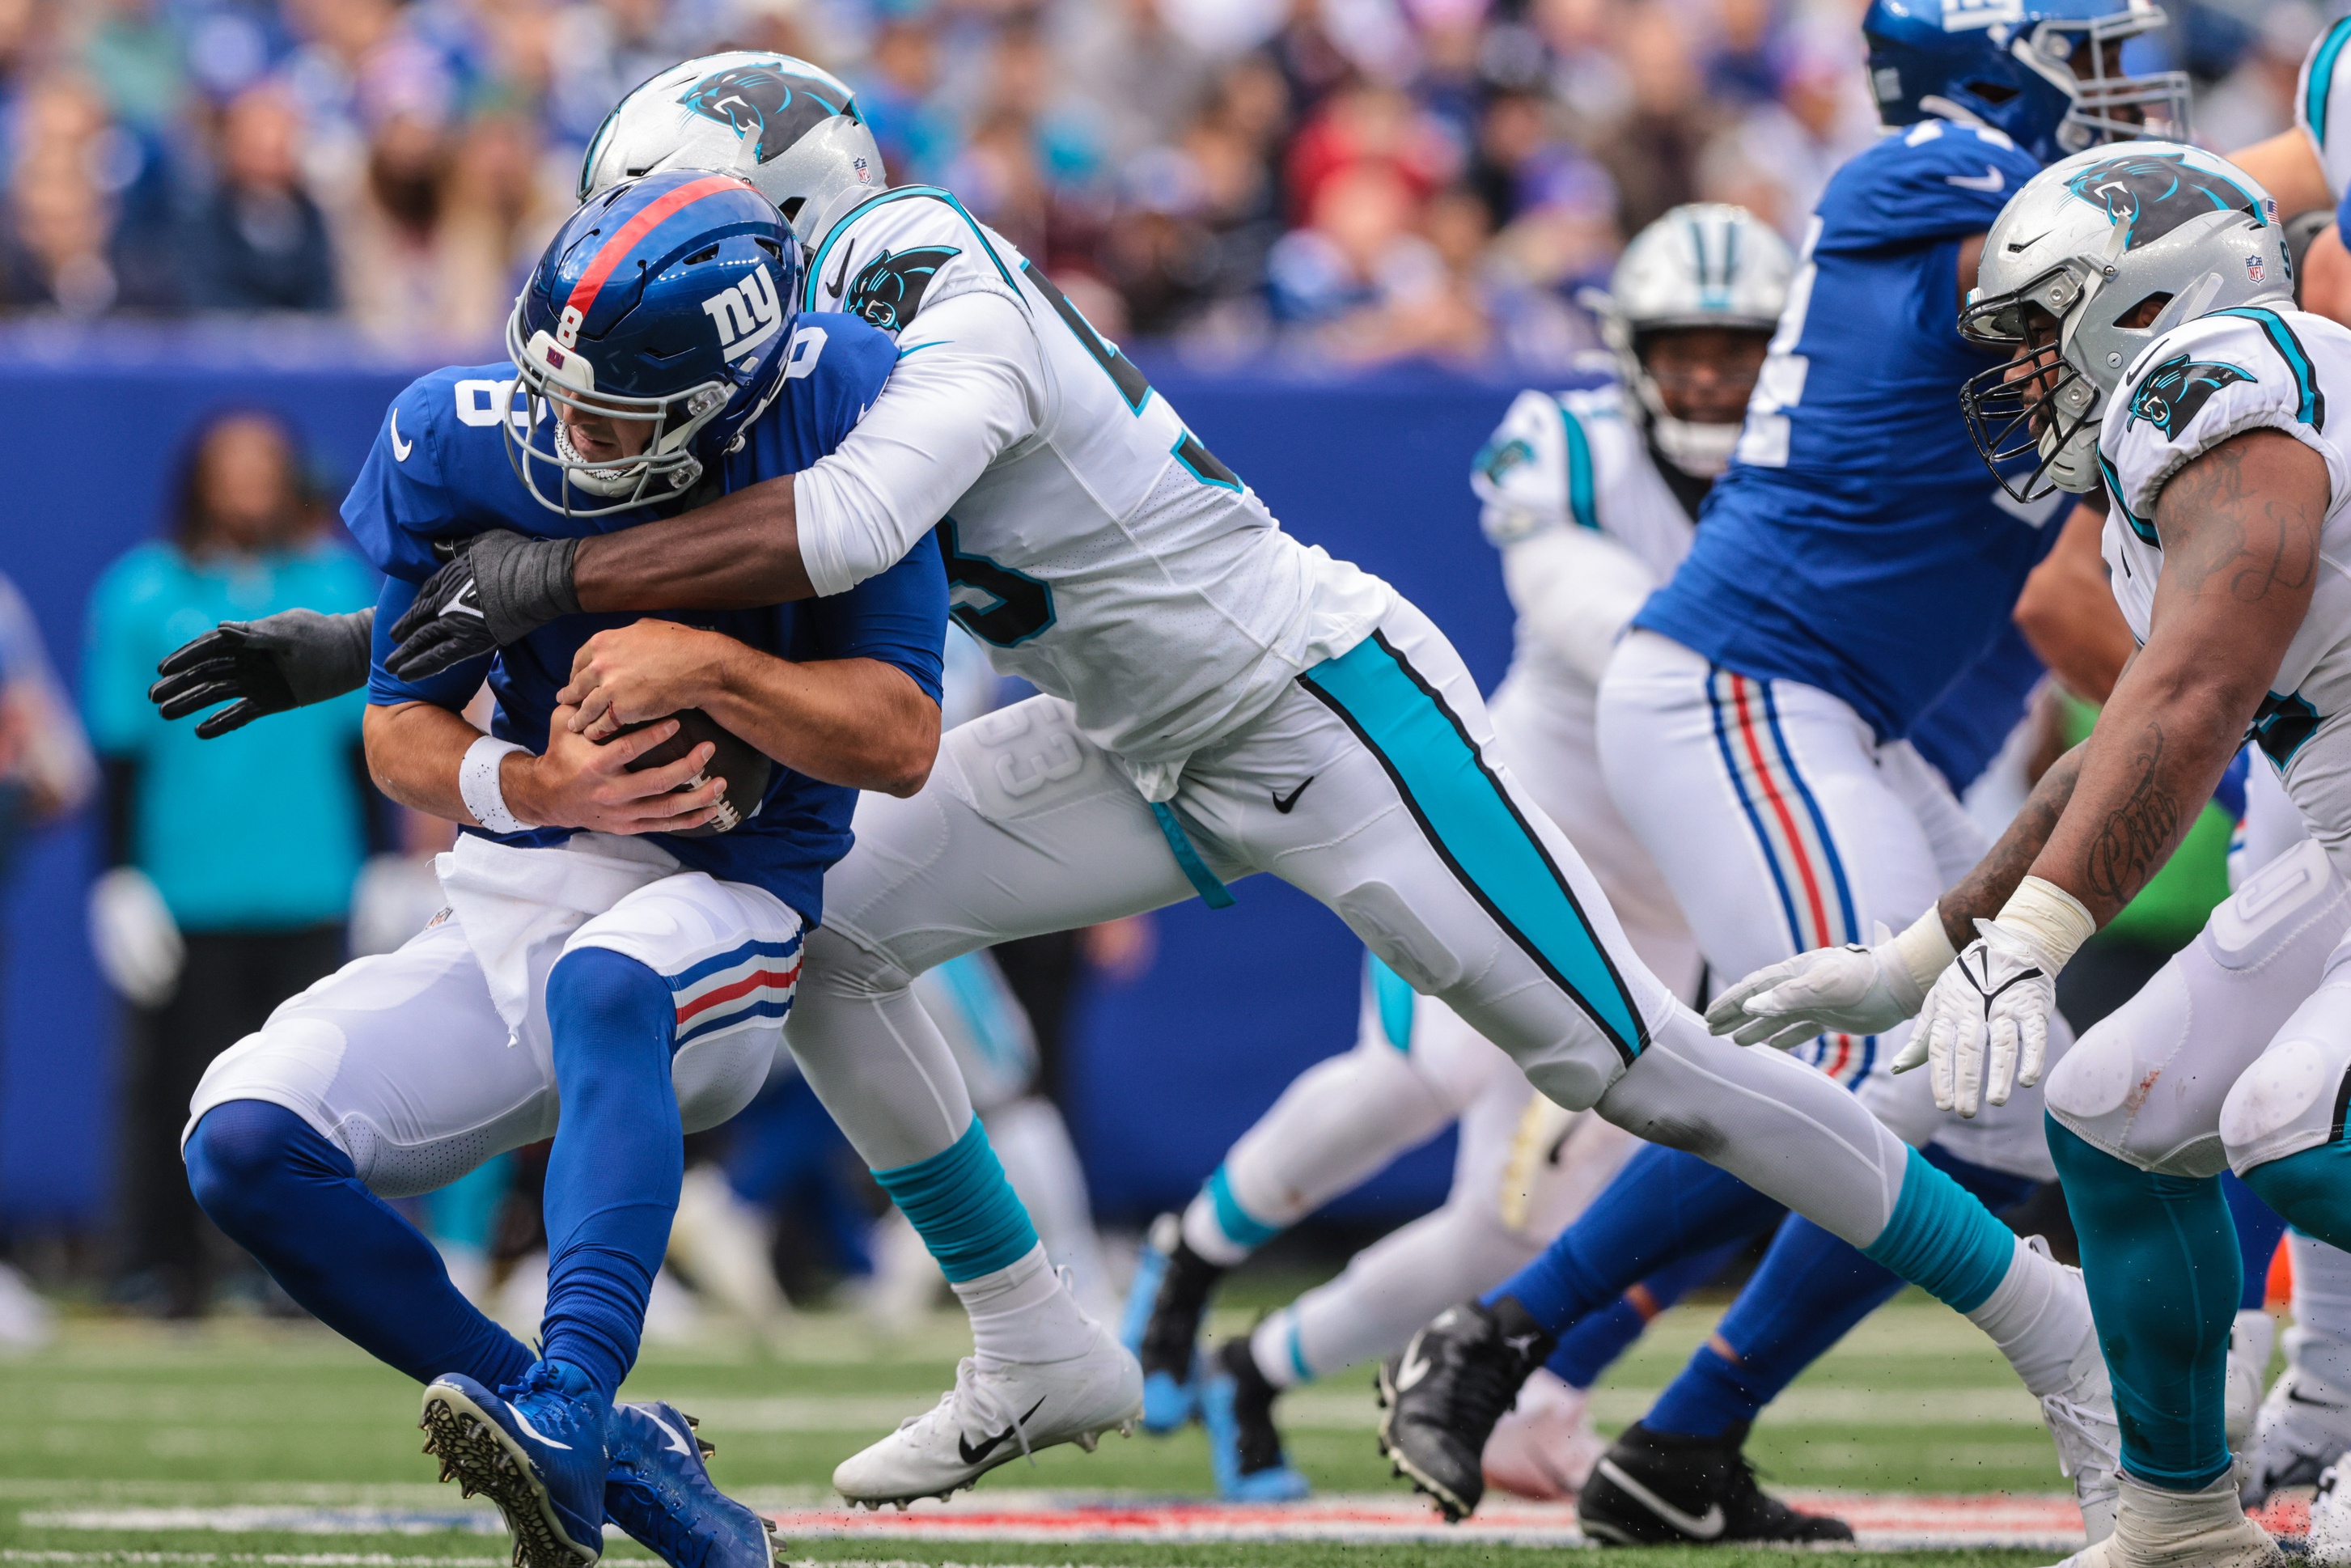 PODCAST: Panthers vs Giants Preview, Keys to the Game, Debut of 